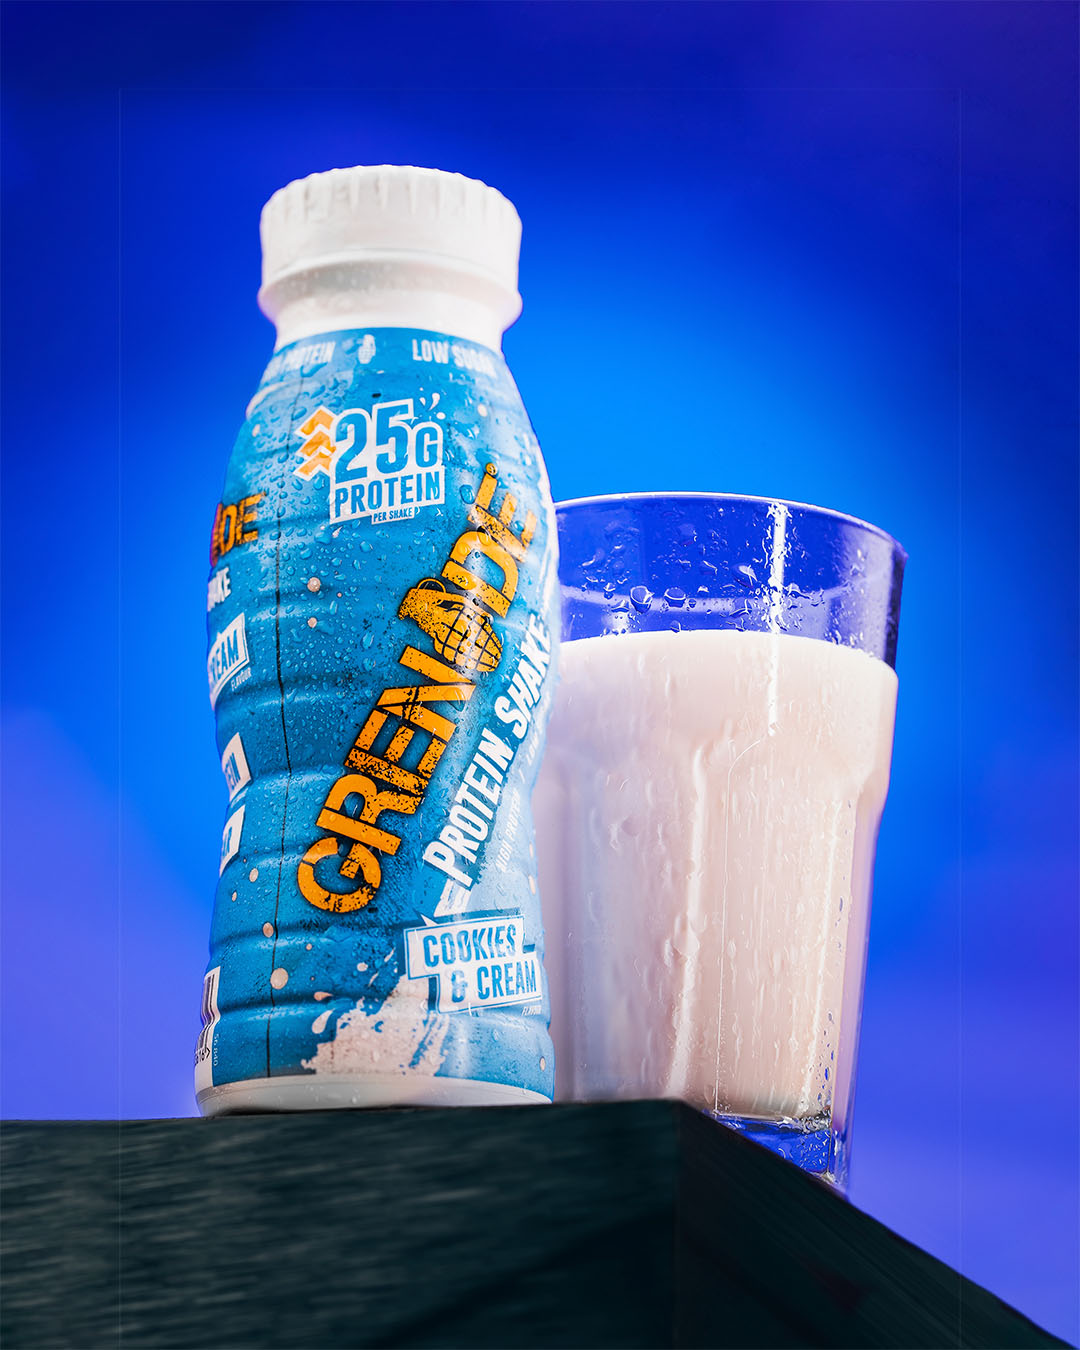 Cookies & Cream Protein Shake in a glass